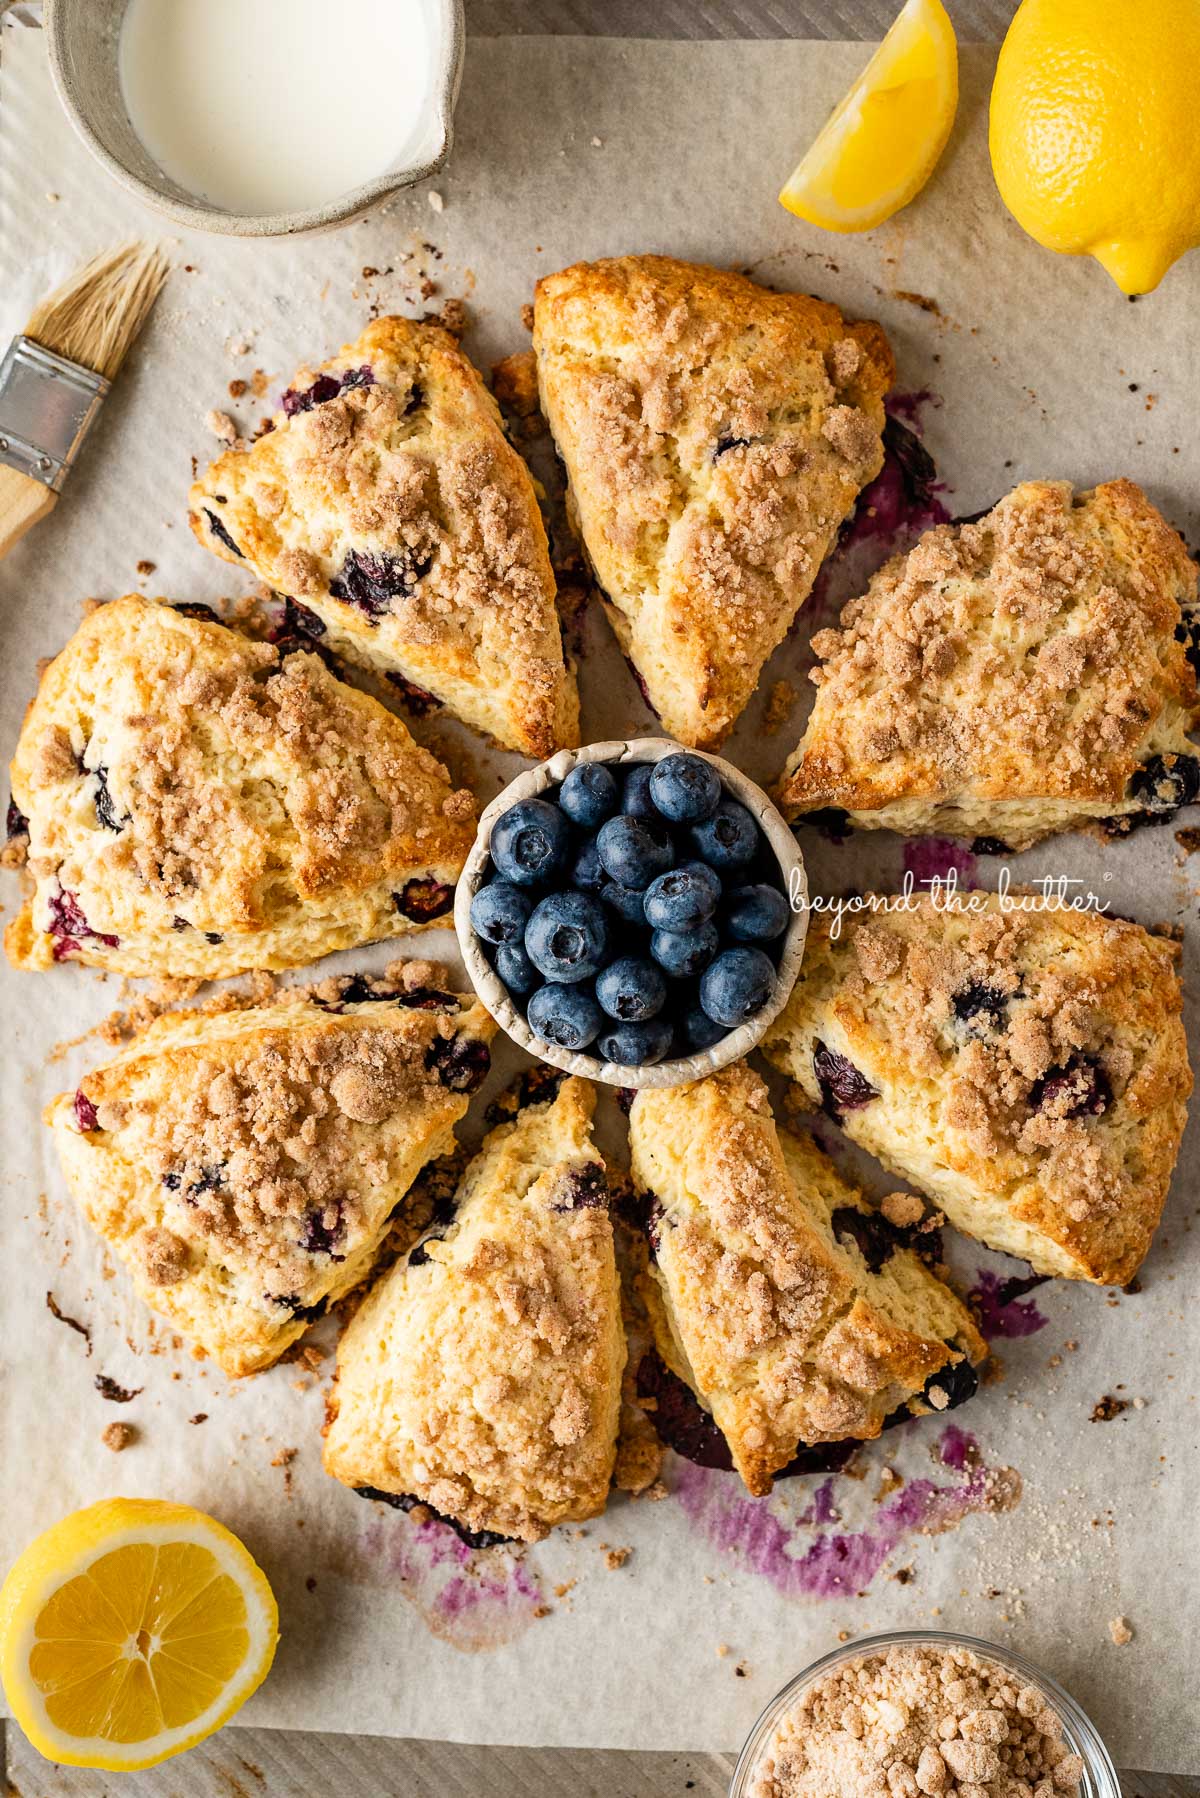 Lemon blueberry streusel scones with a small bowl of blueberries in the center on a parchment lined baking sheet | © Beyond the Butter®